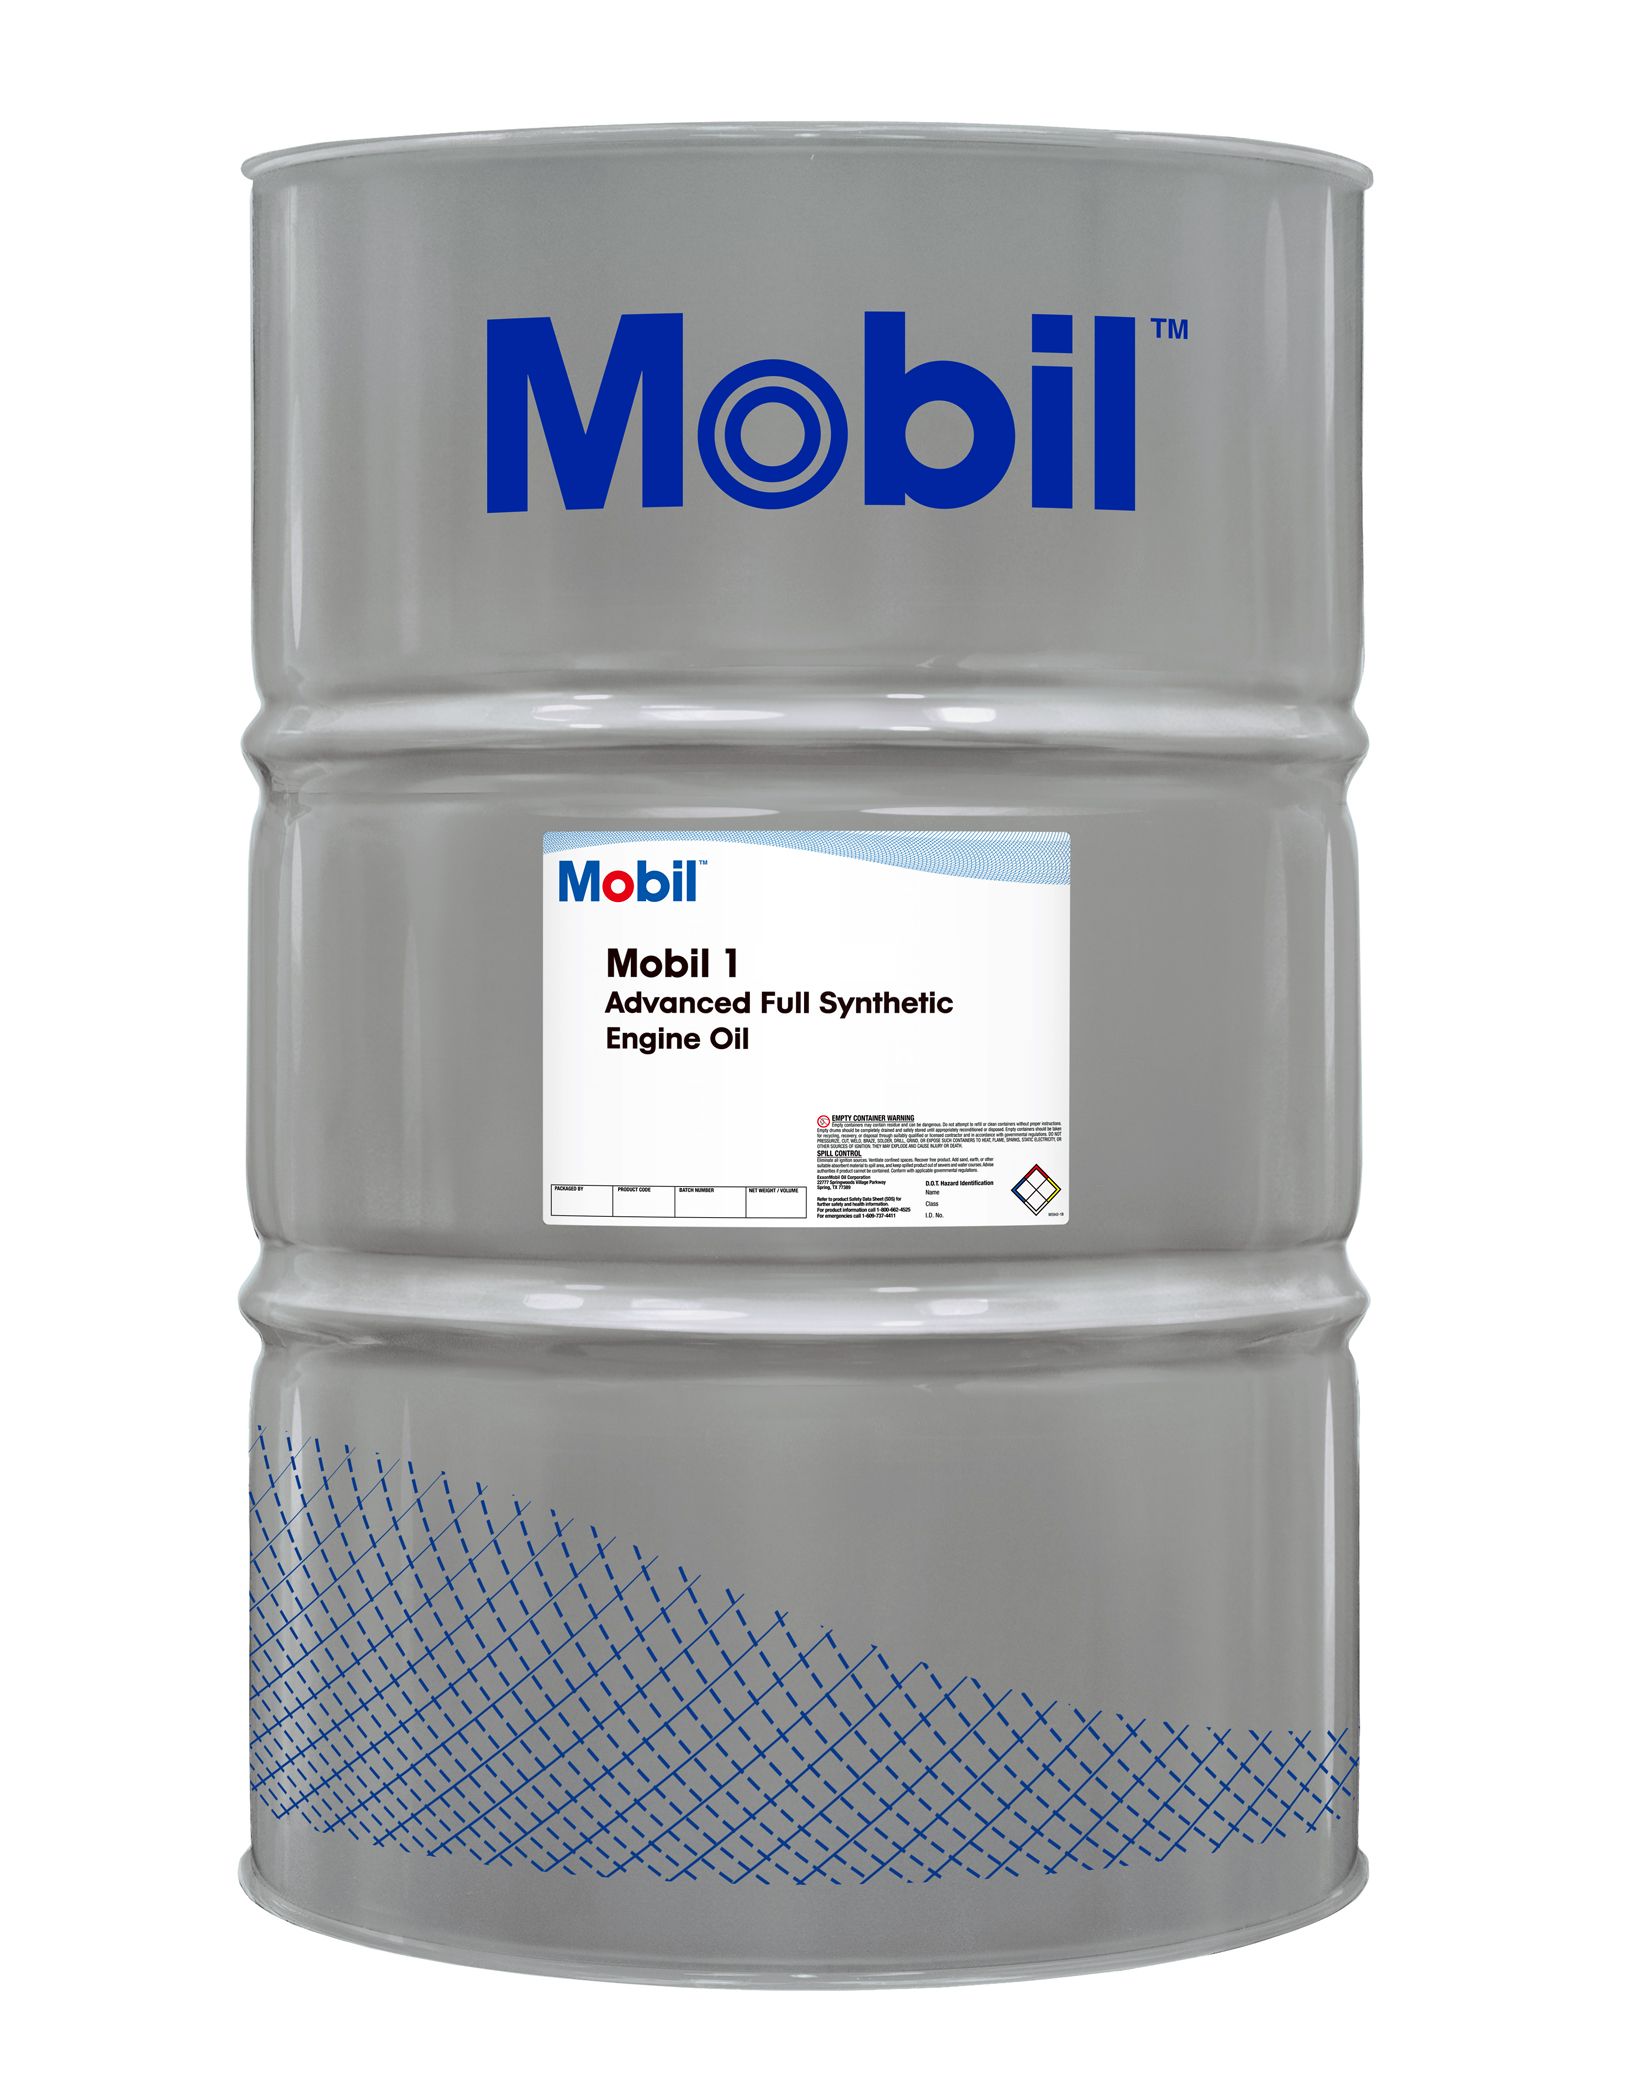 MOBIL 1 0W-40 100% SYNTHETIC, 55 Gallon Drum